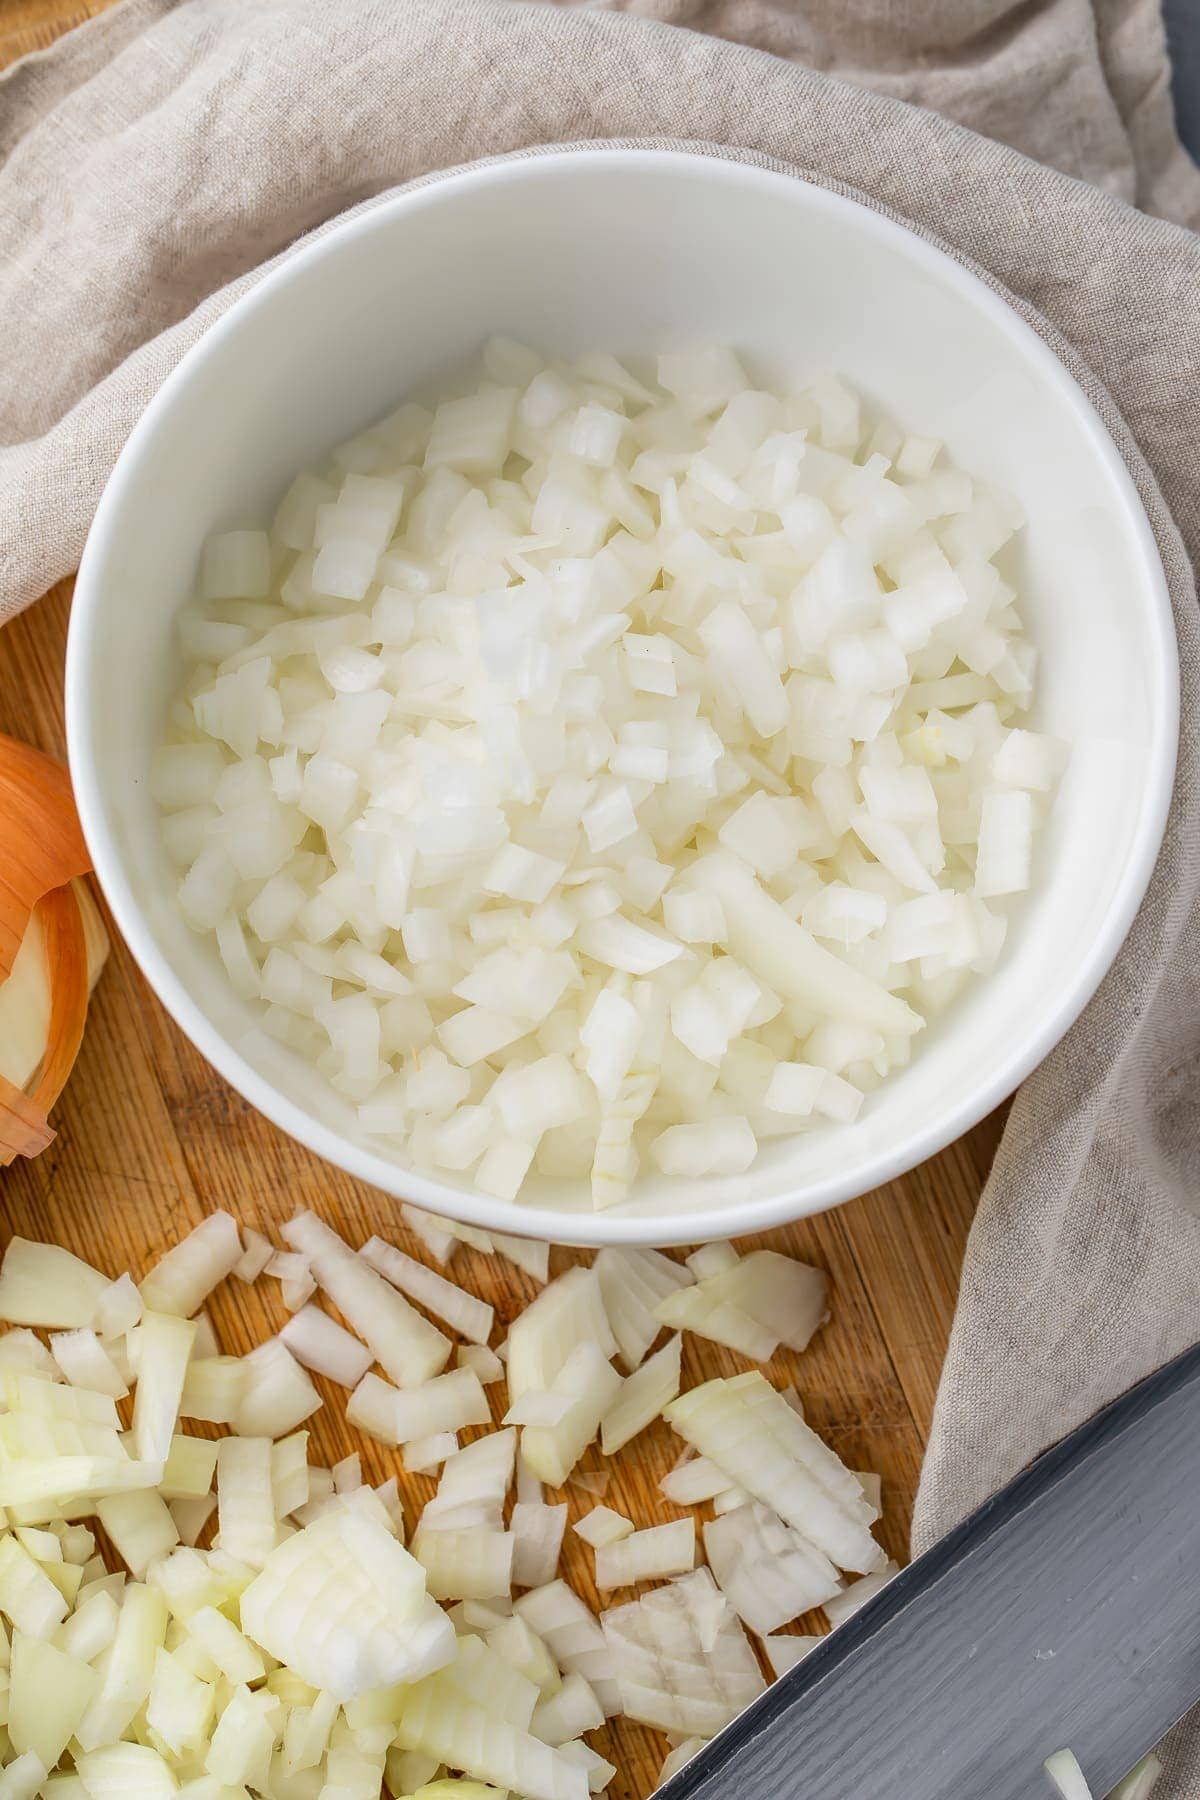 https://40aprons.com/wp-content/uploads/2021/08/how-to-dice-onion-12.jpg